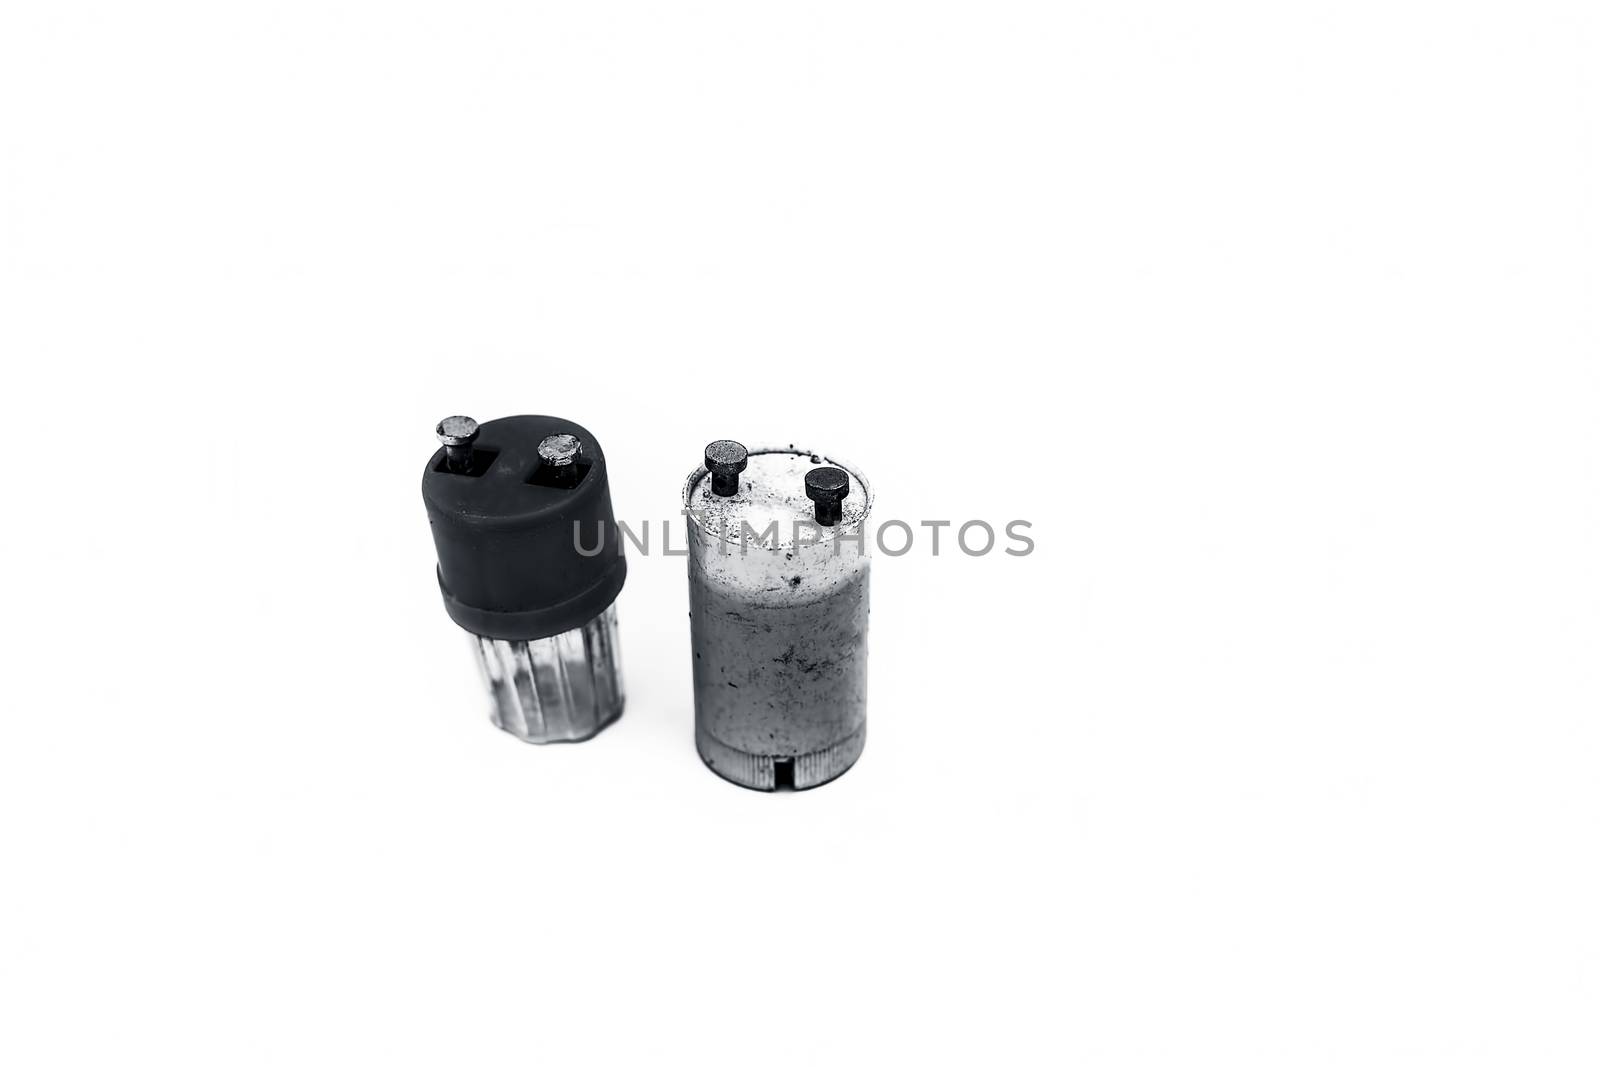 Close up of plastic colorful capacitors or stators isolated on white widely used in old types of Flour scent.